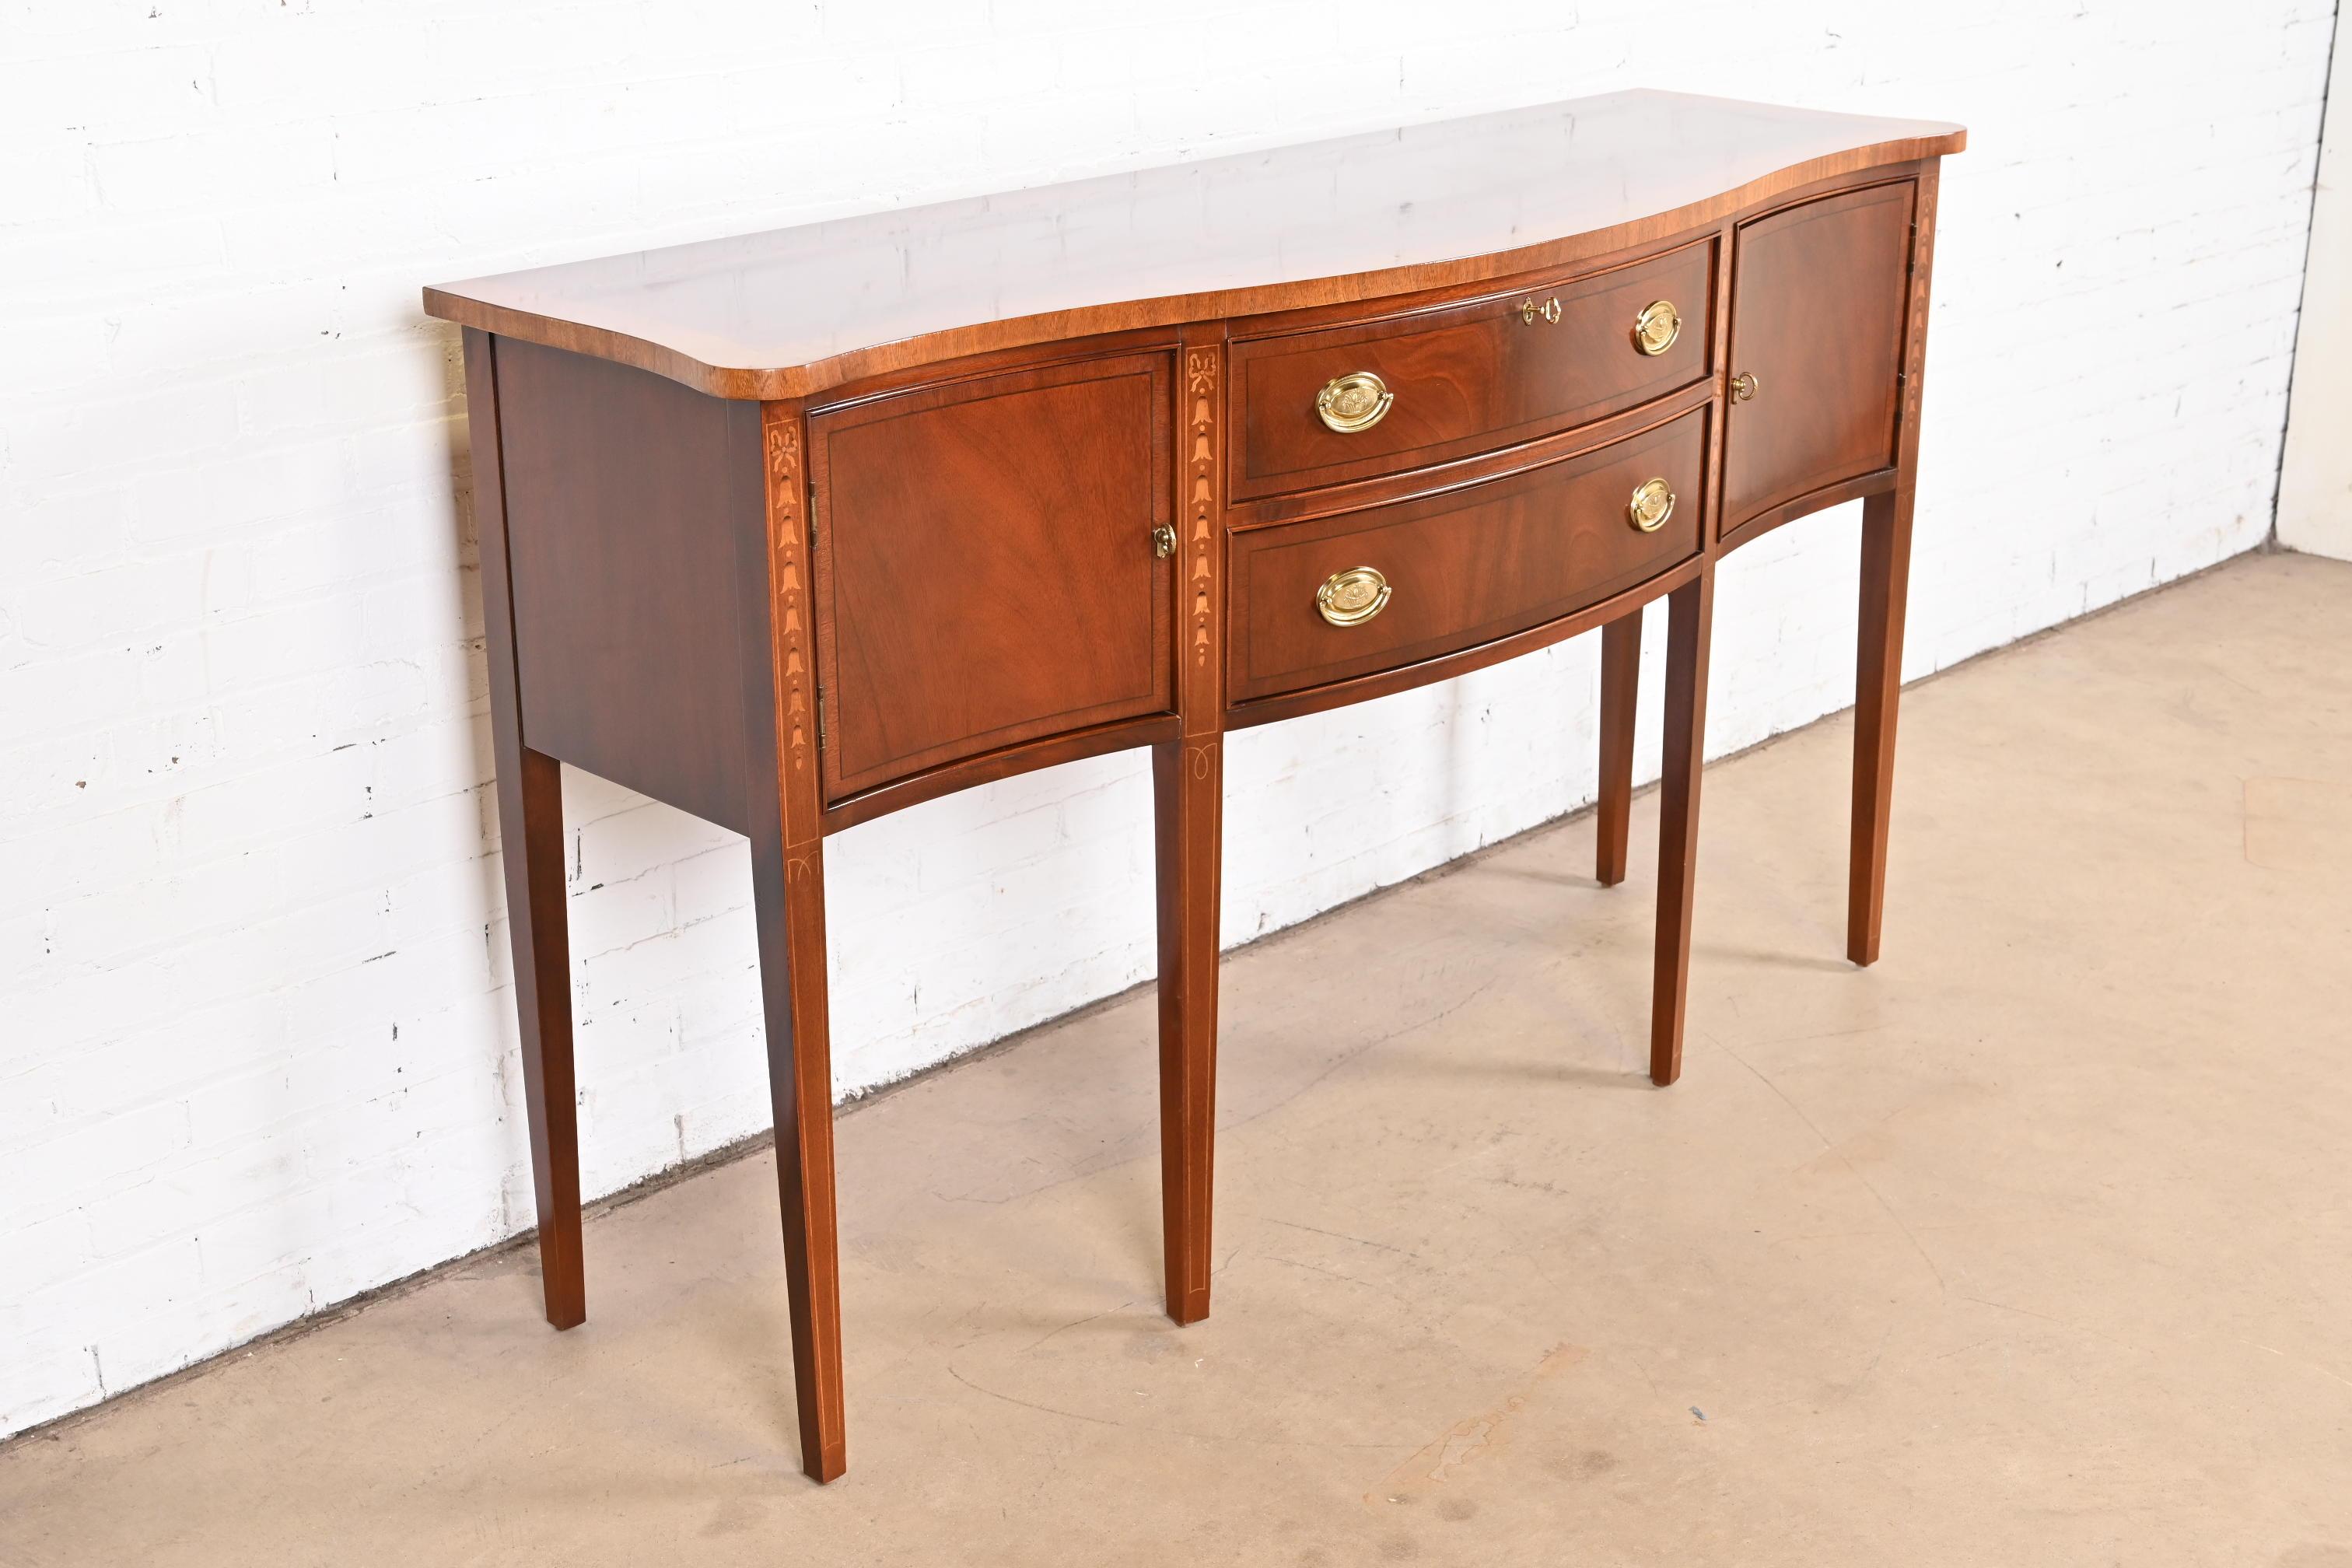 Hepplewhite Inlaid Mahogany Serpentine Front Sideboard Credenza For Sale 1